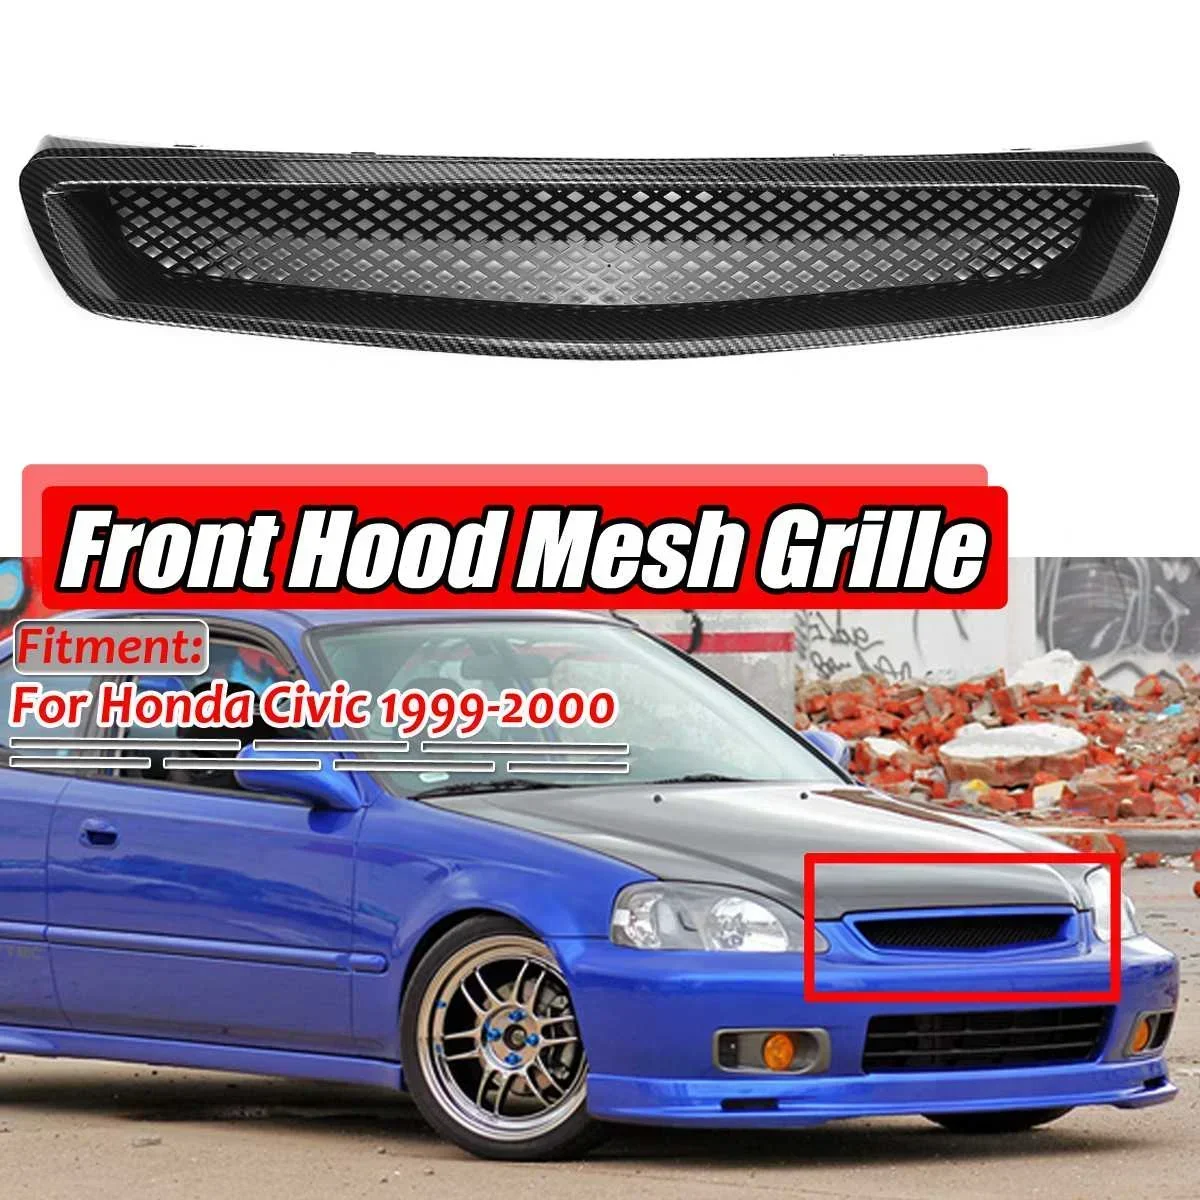 

Car Front Hood Mesh Bumper Grills for Honda For Civic EK CX DX EX HX LX Type R 1999-2000 ABS Front Mesh Grille Cover Body Kit